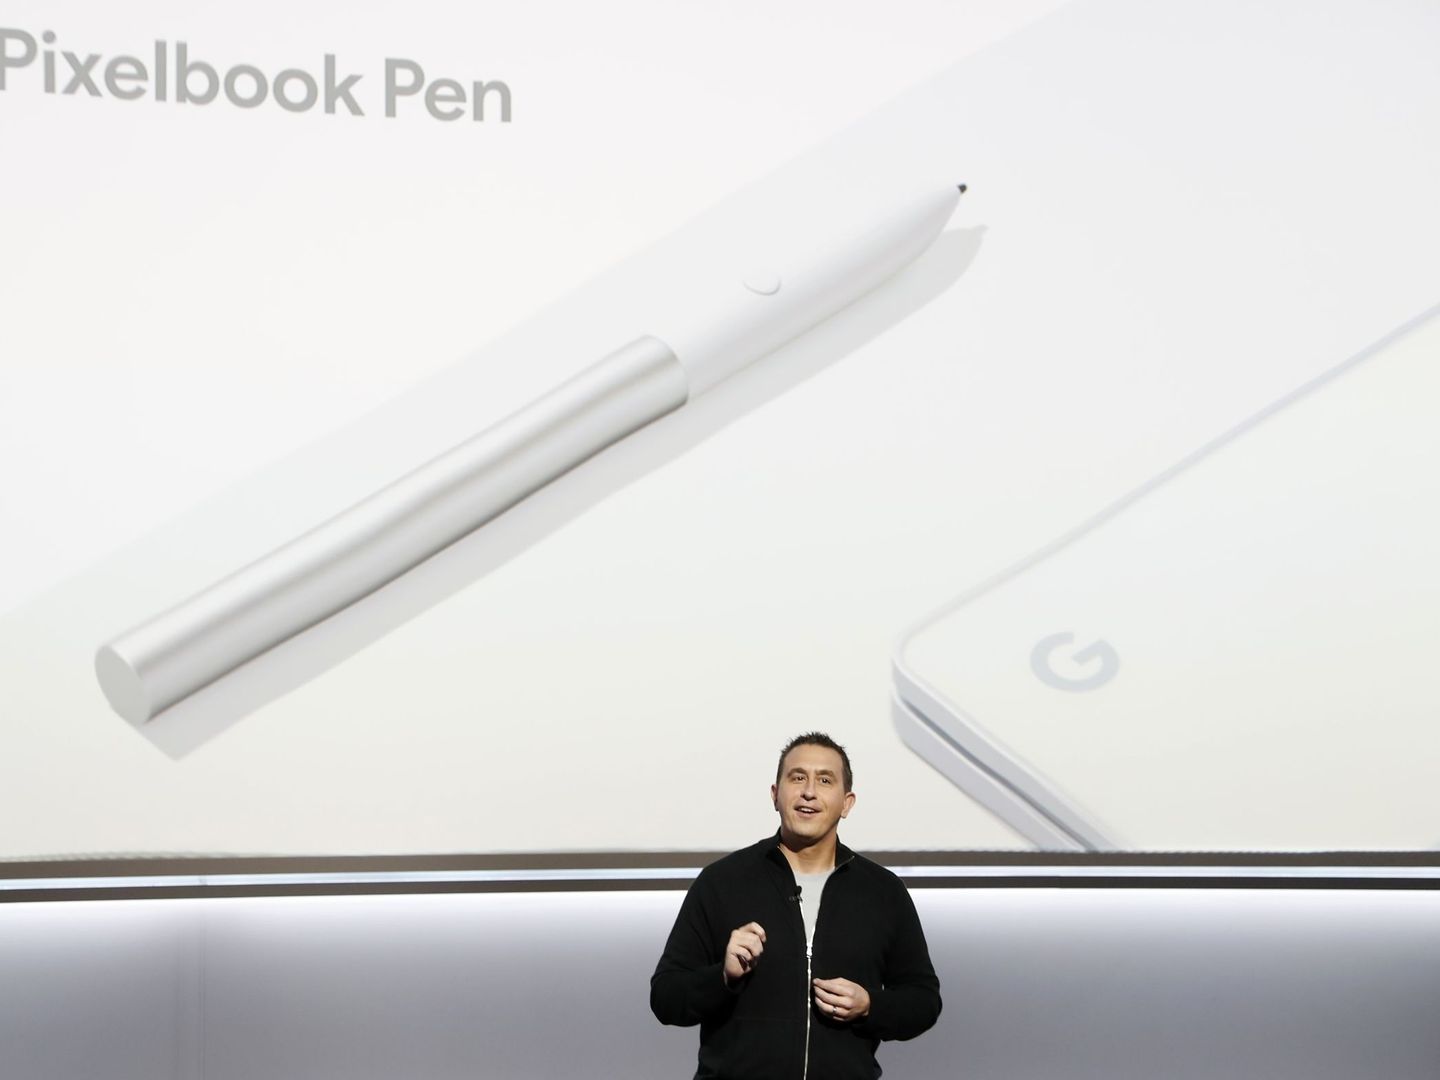 Google product manager Matt Vokoun speaks about the Pixelbook Pen during a launch event in San Francisco, California, U.S. October 4, 2017. REUTERS Stephen Lam